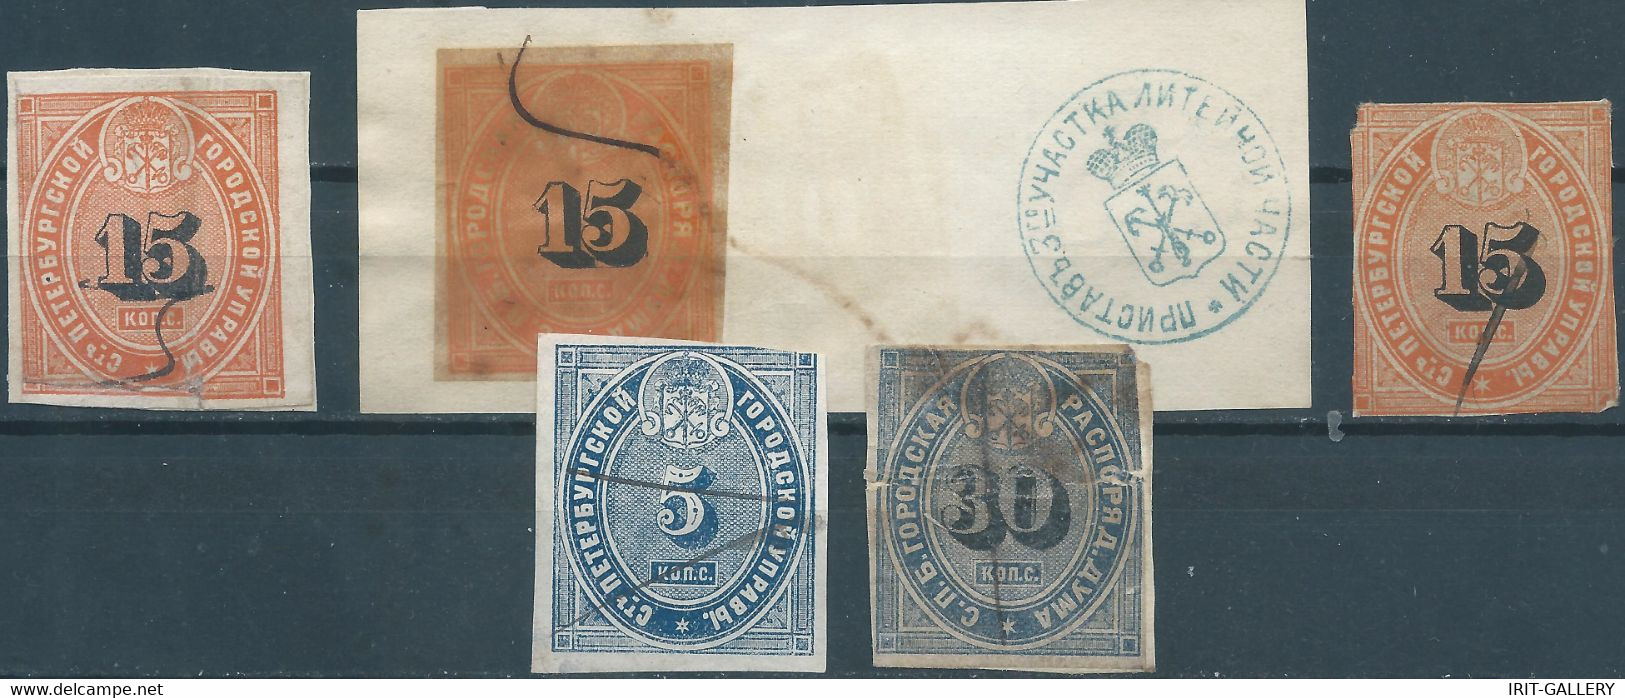 Russia - Russie - Russland,SAINT PETERSBURG 1860/1885 Revenue Stamps Tax And Services  Used On The Cut Paper,very Old - Steuermarken